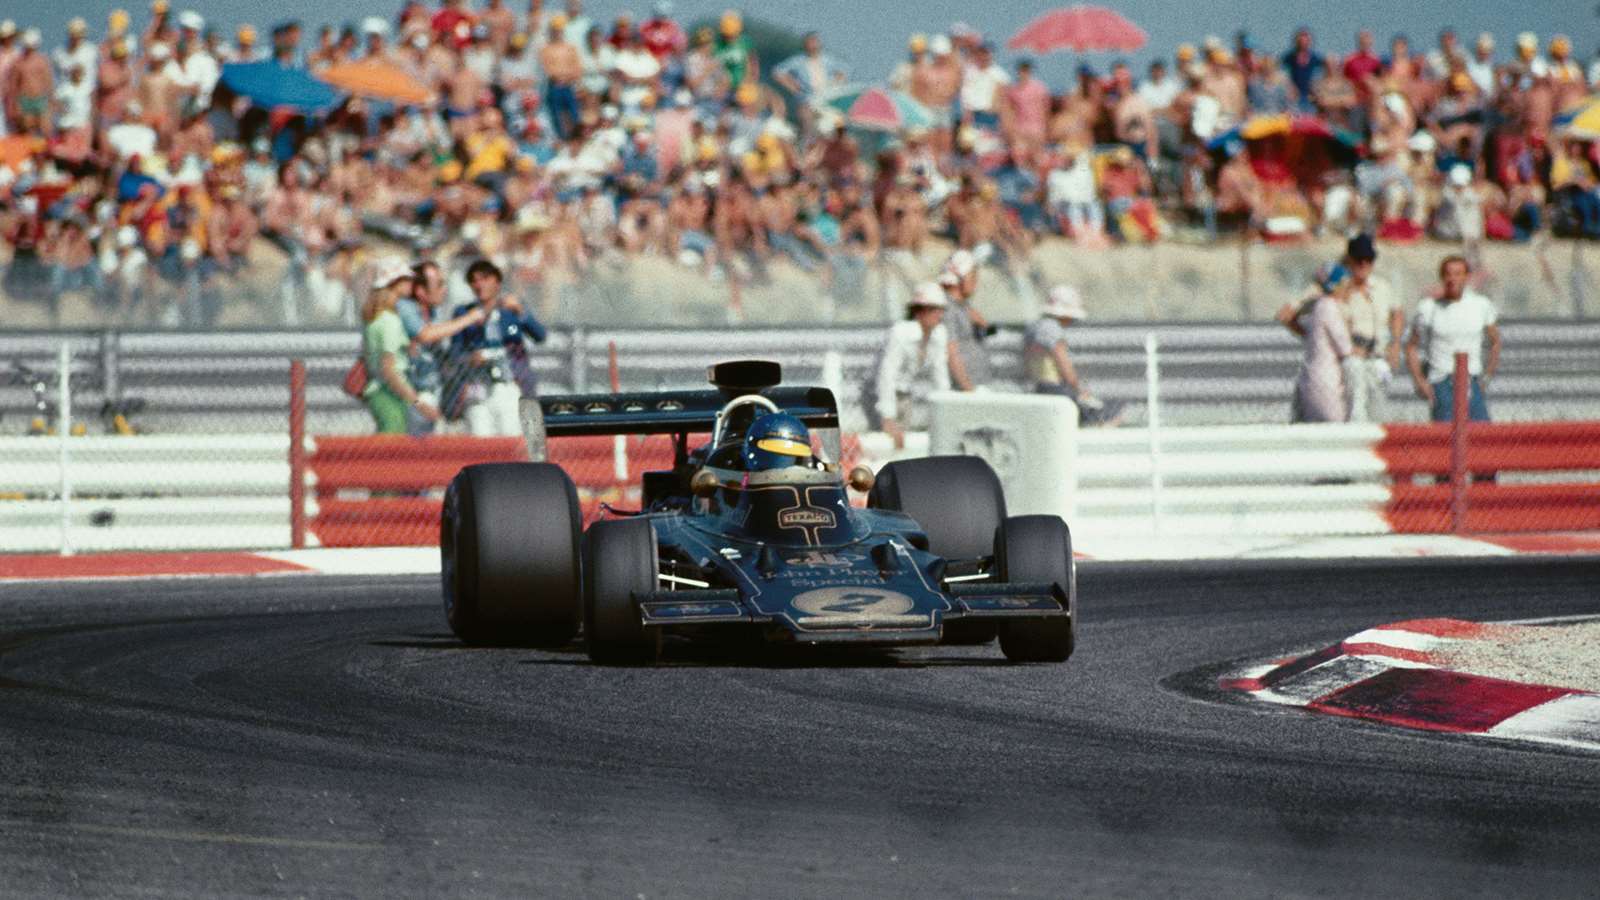 Ronnie Peterson, Lotus 72 Ford, at the French Grand Prix in Paul Ricard on July 01, 1973. 